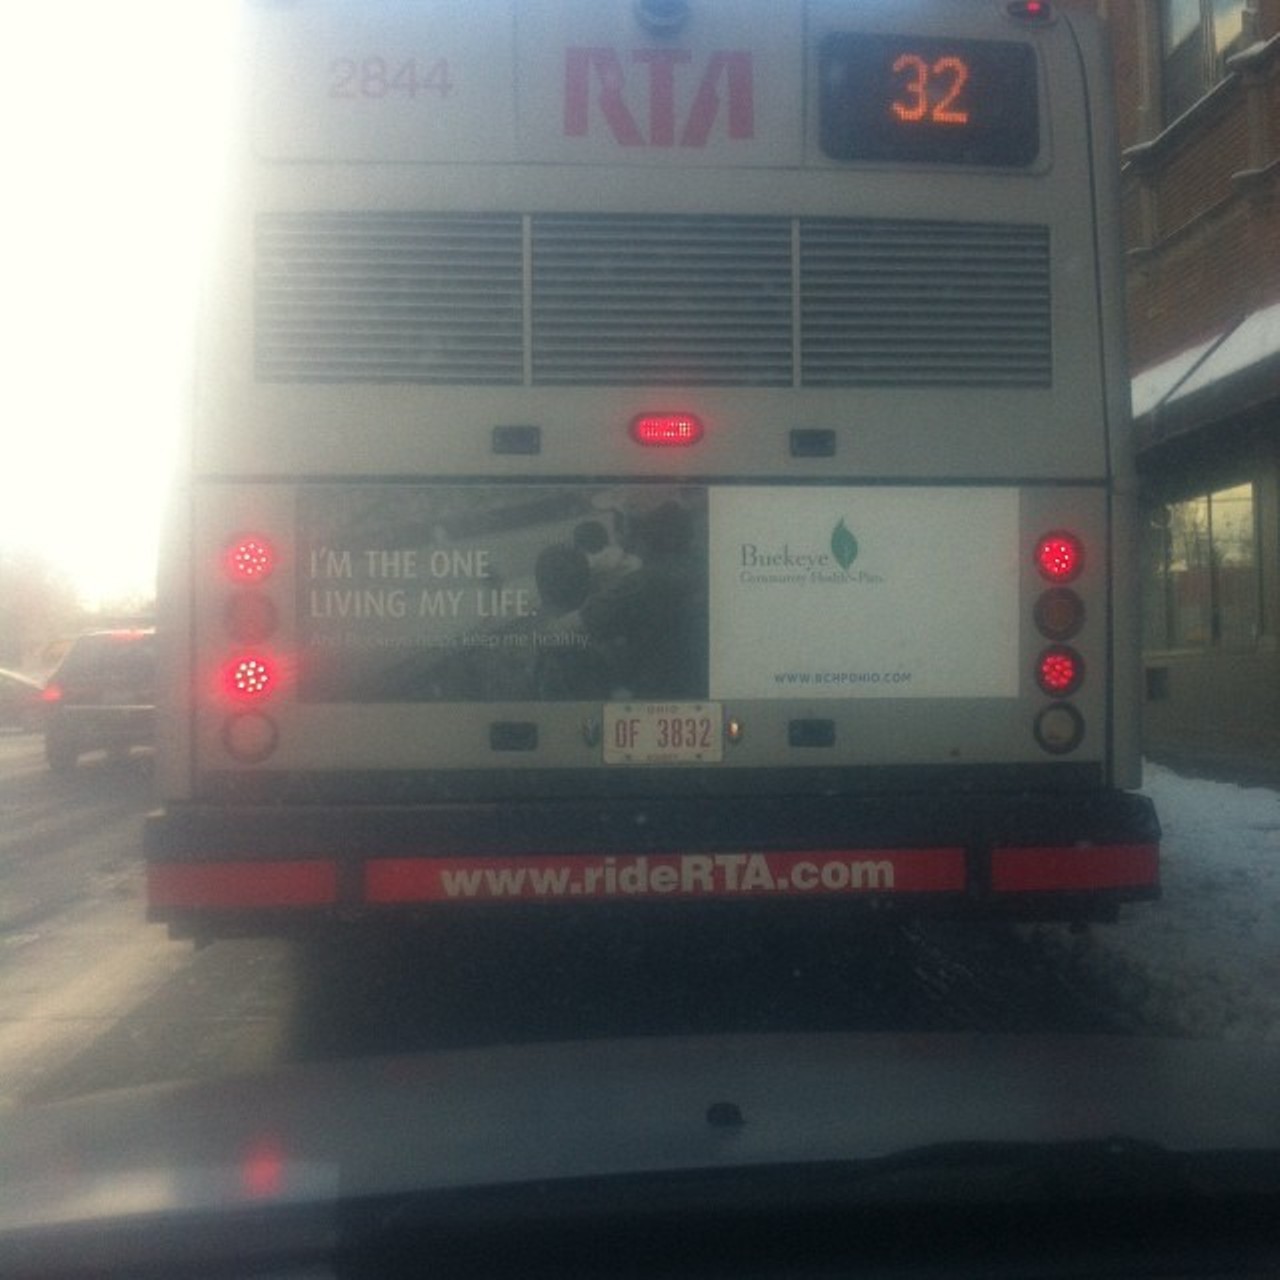 Why is it always me getting stuck behind the buses #Clevelandprobz